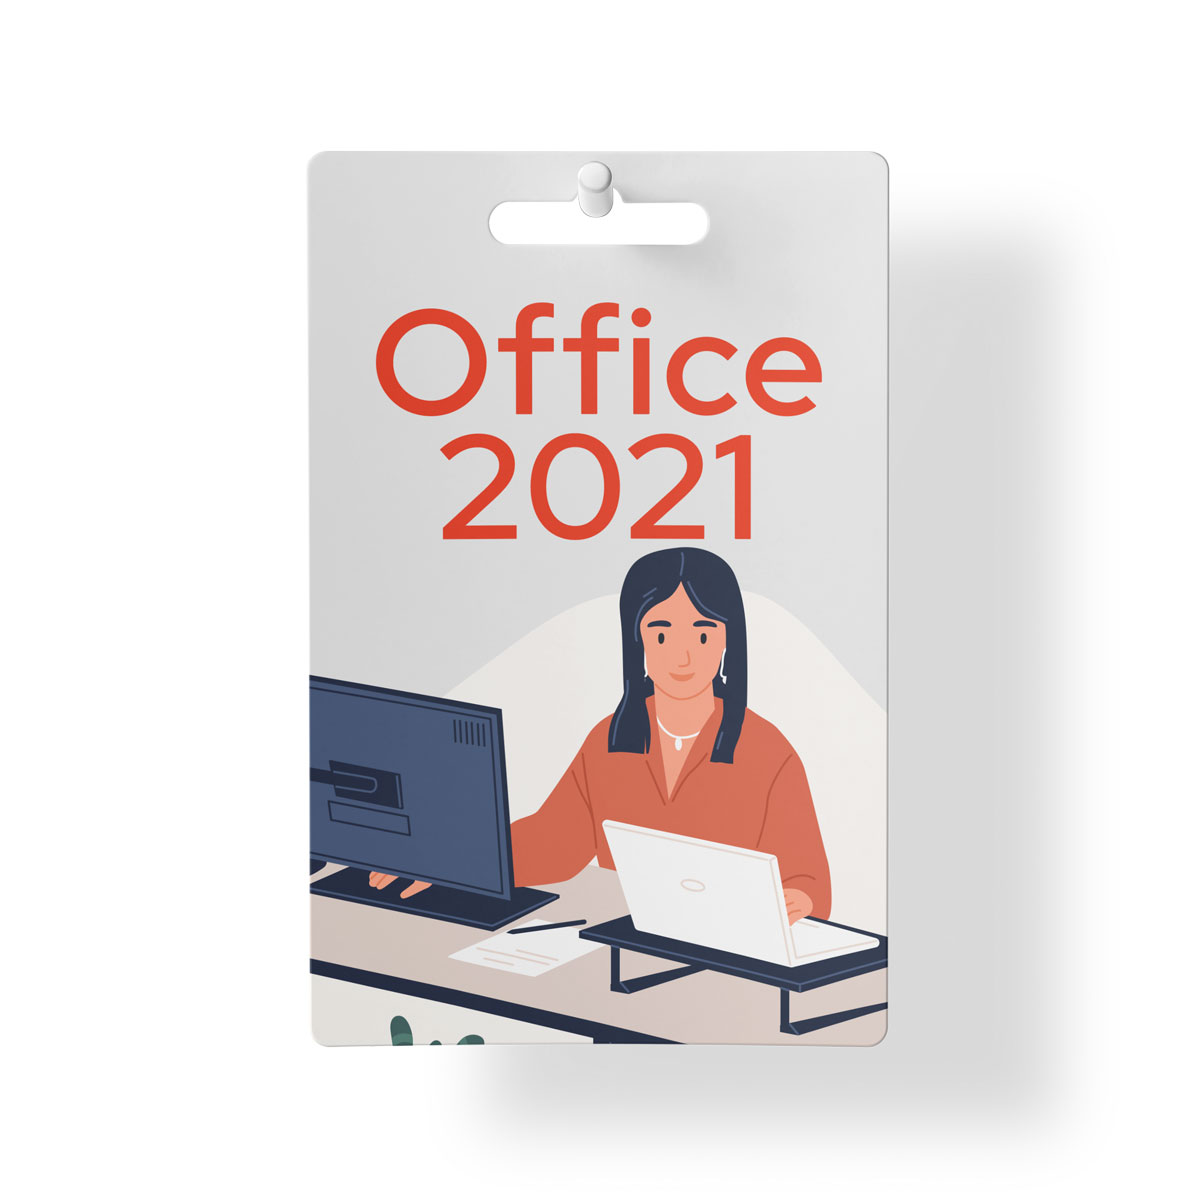 Microsoft Office 2021 Professional Plus 5 PC : Licence à vie - Yeslicense